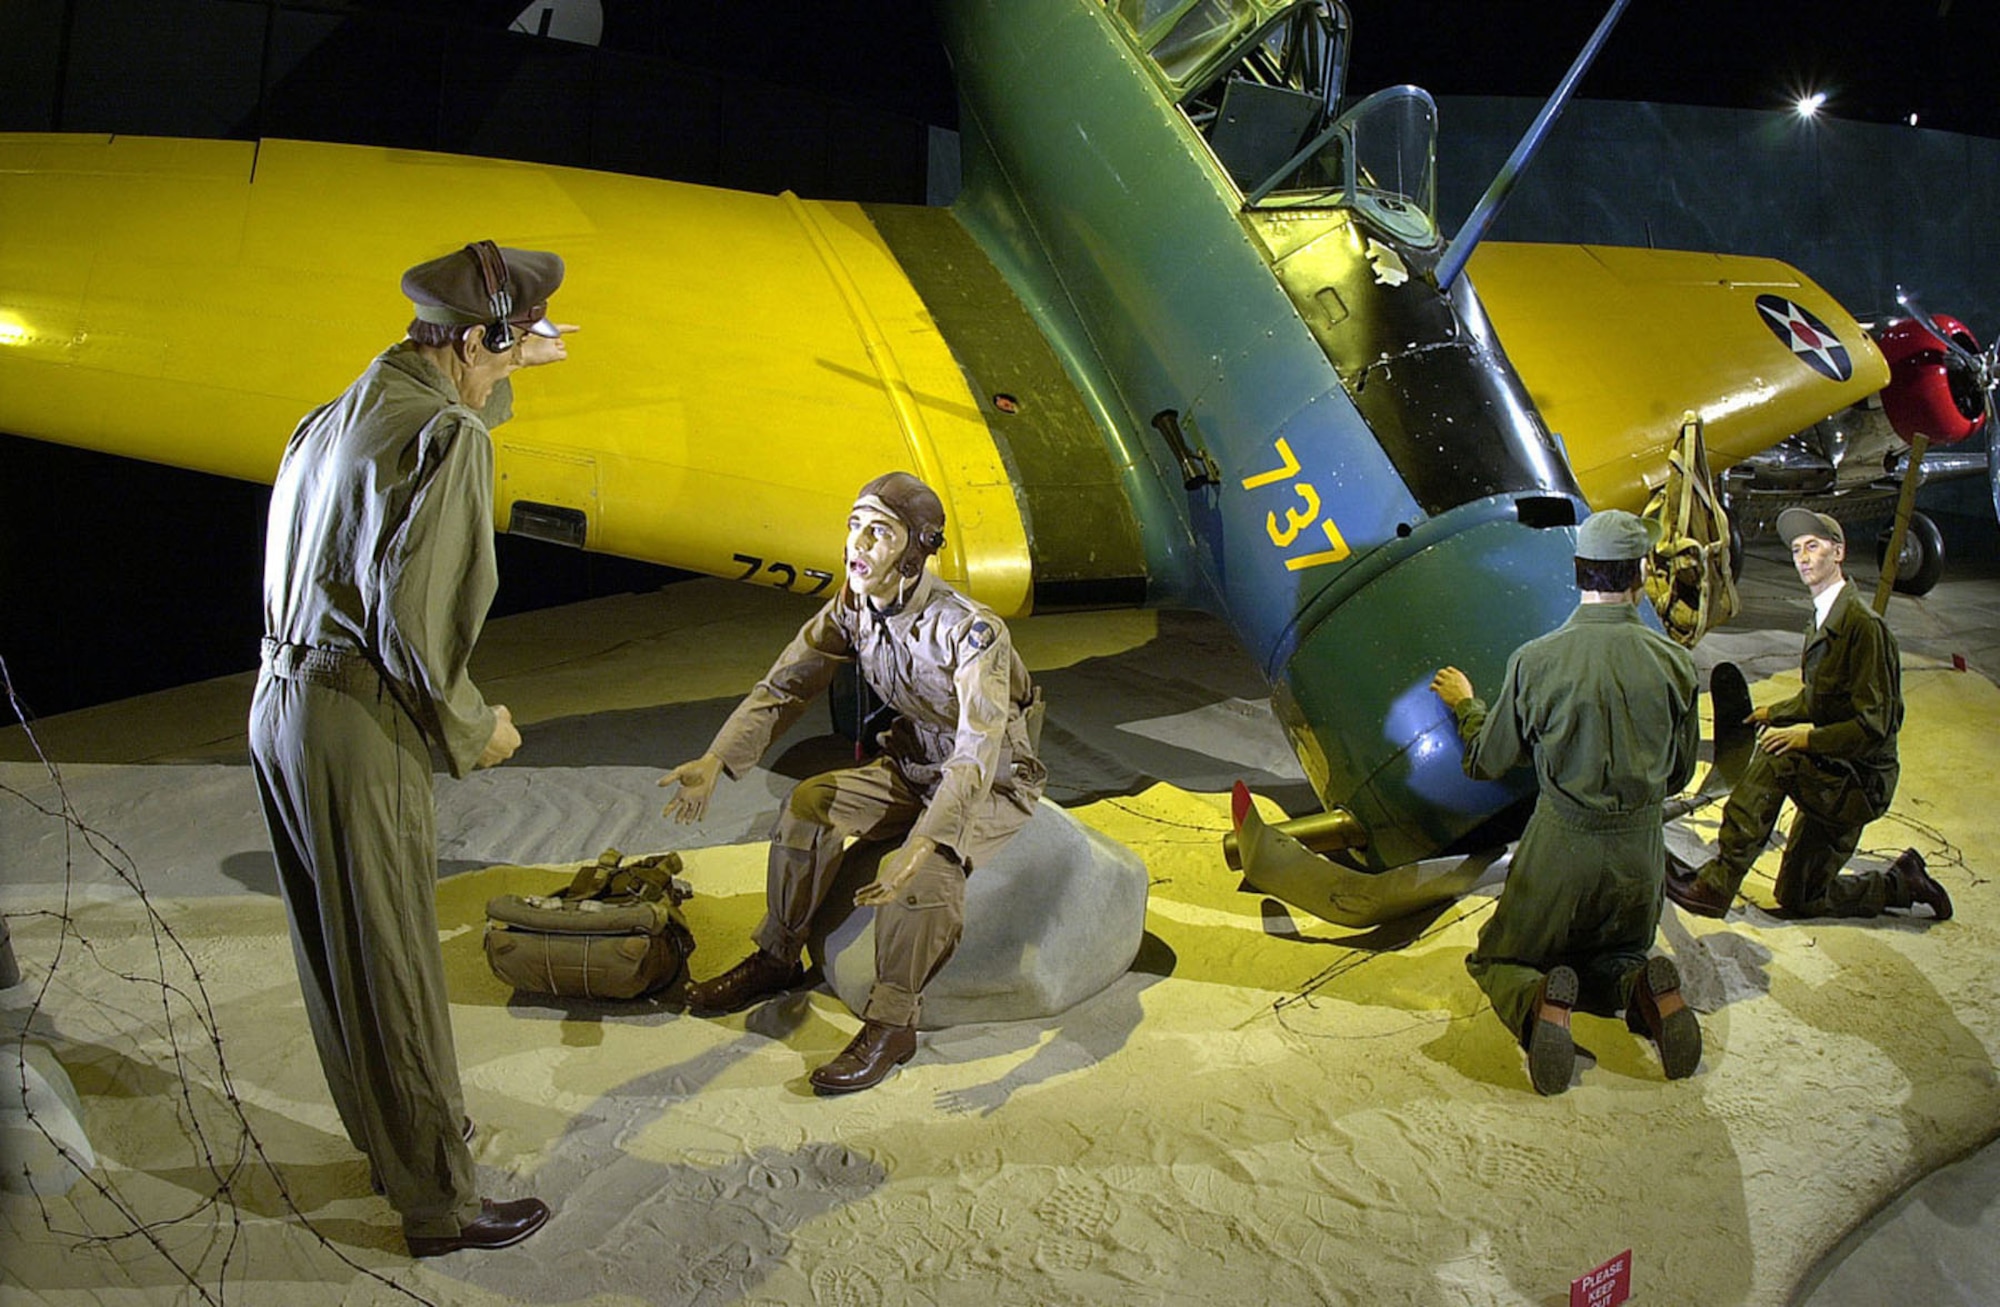 DAYTON, Ohio -- Trainer crash diorama in the Early Years Gallery at the National Museum of the United States Air Force. (U.S. Air Force photo)